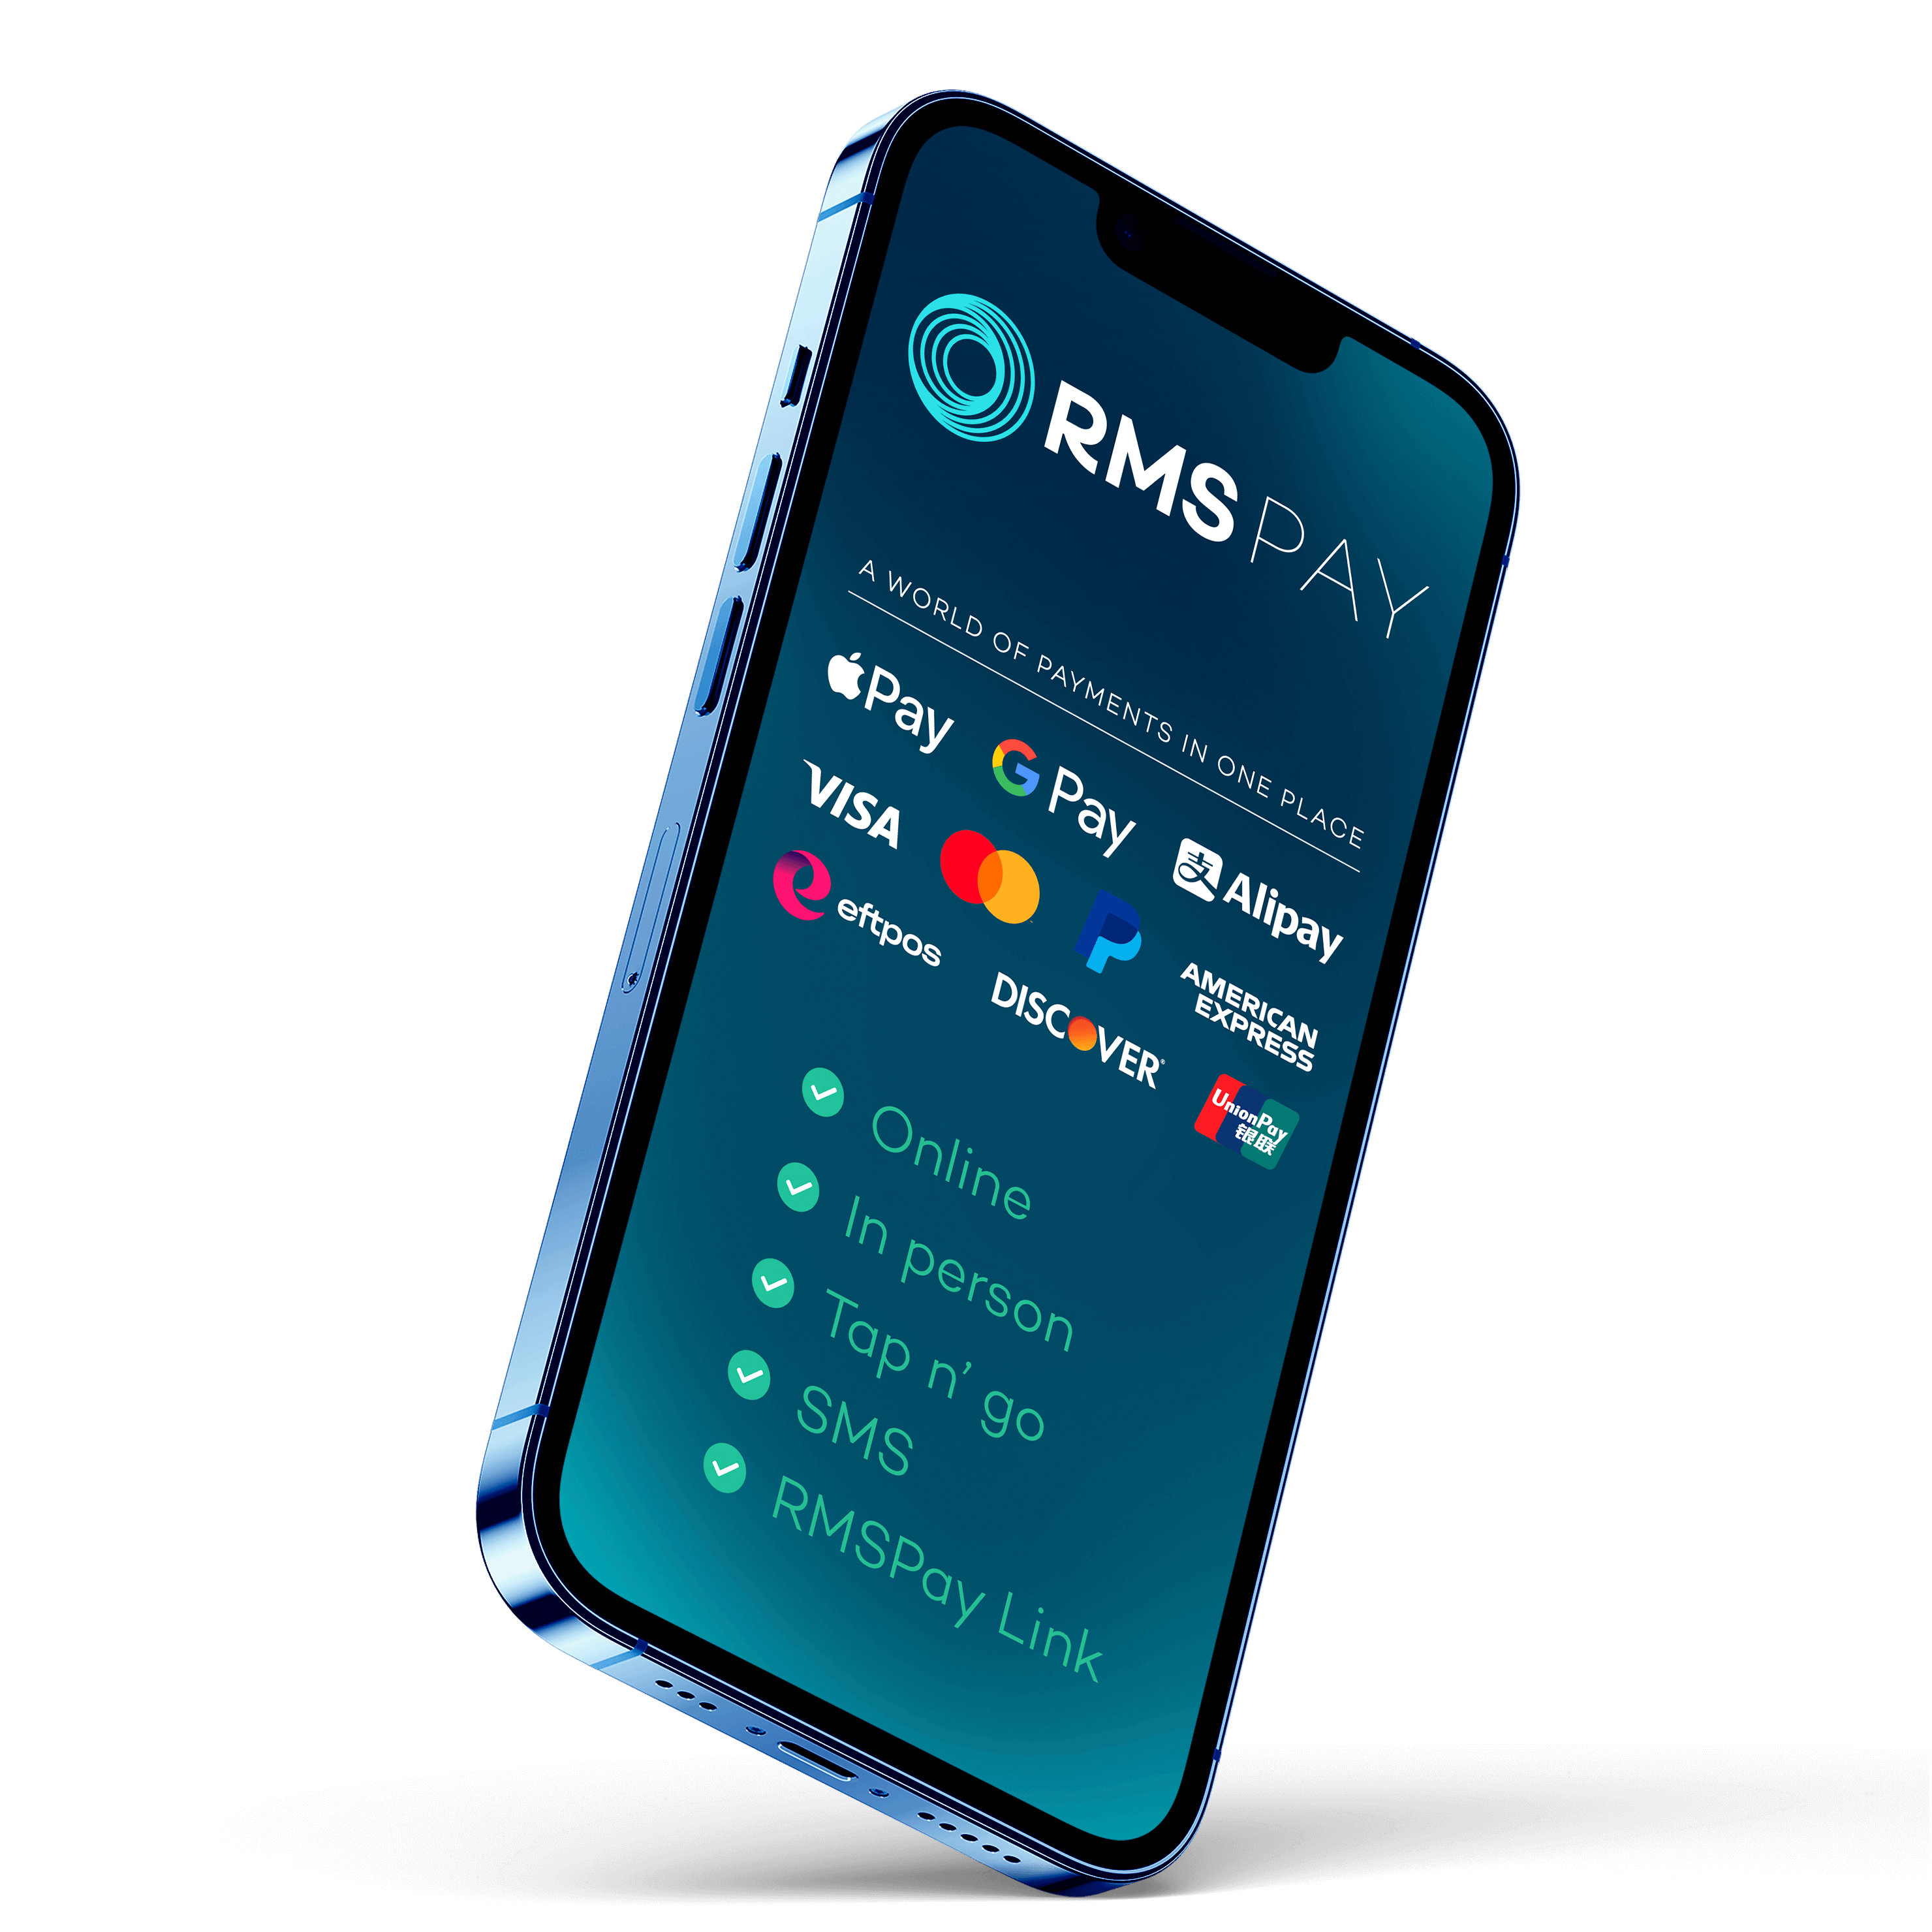 RMS Pay_payment options